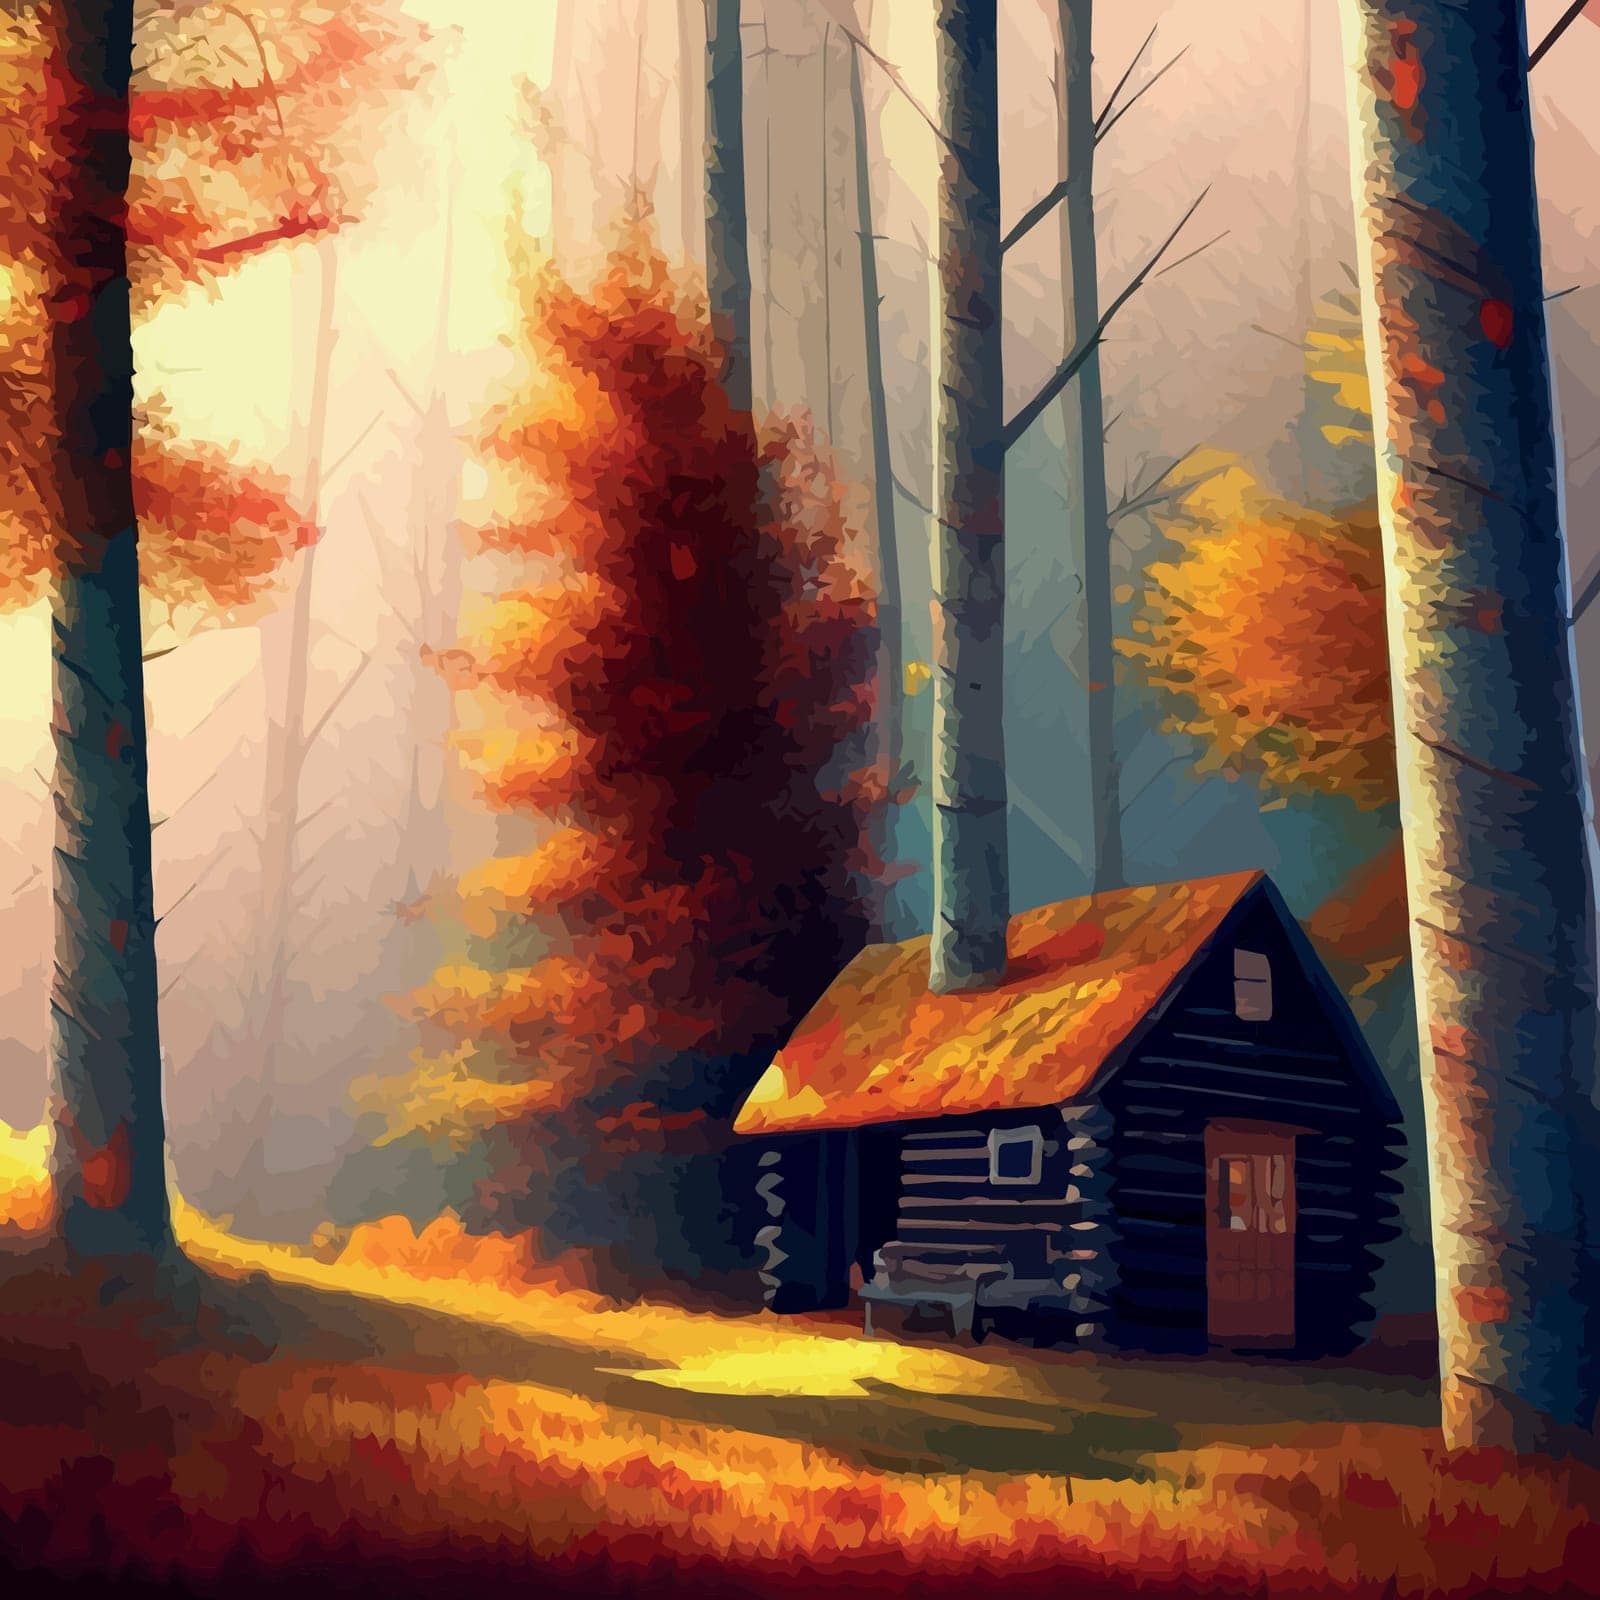 Old wooden hut in autumn forest. In bright orange colors autumn. To protect by EkaterinaPereslavtseva